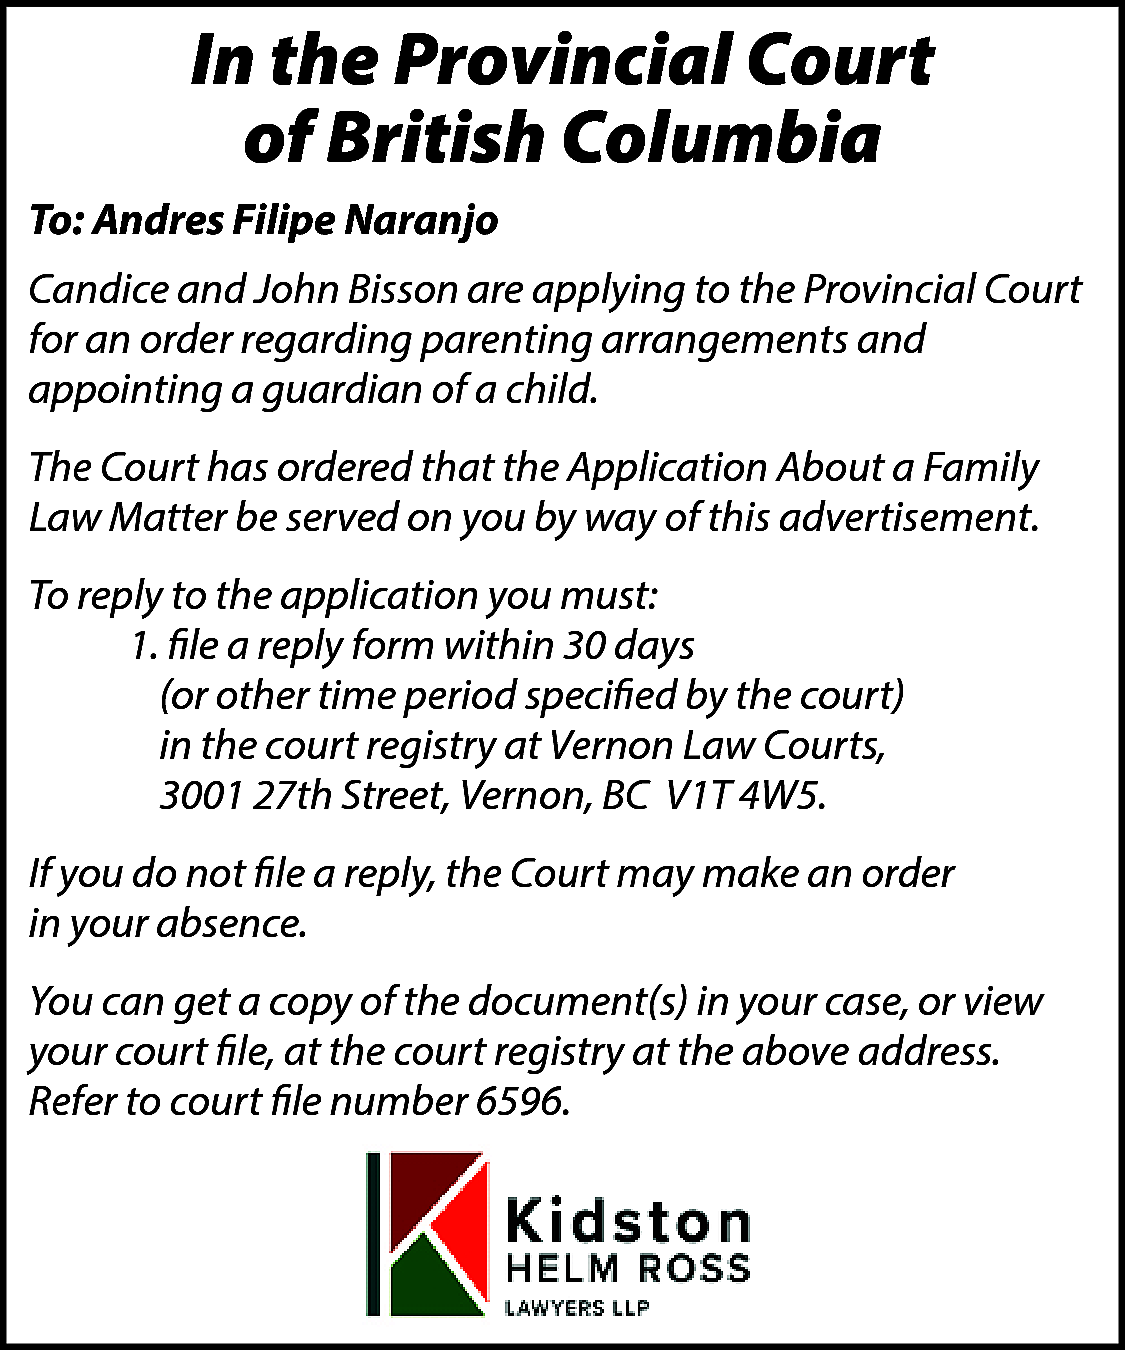 In the Provincial Court <br>of  In the Provincial Court  of British Columbia  To: Andres Filipe Naranjo  Candice and John Bisson are applying to the Provincial Court  for an order regarding parenting arrangements and  appointing a guardian of a child.  The Court has ordered that the Application About a Family  Law Matter be served on you by way of this advertisement.  To reply to the application you must:  1. file a reply form within 30 days  (or other time period specified by the court)  in the court registry at Vernon Law Courts,  3001 27th Street, Vernon, BC V1T 4W5.  If you do not file a reply, the Court may make an order  in your absence.  You can get a copy of the document(s) in your case, or view  your court file, at the court registry at the above address.  Refer to court file number 6596.    